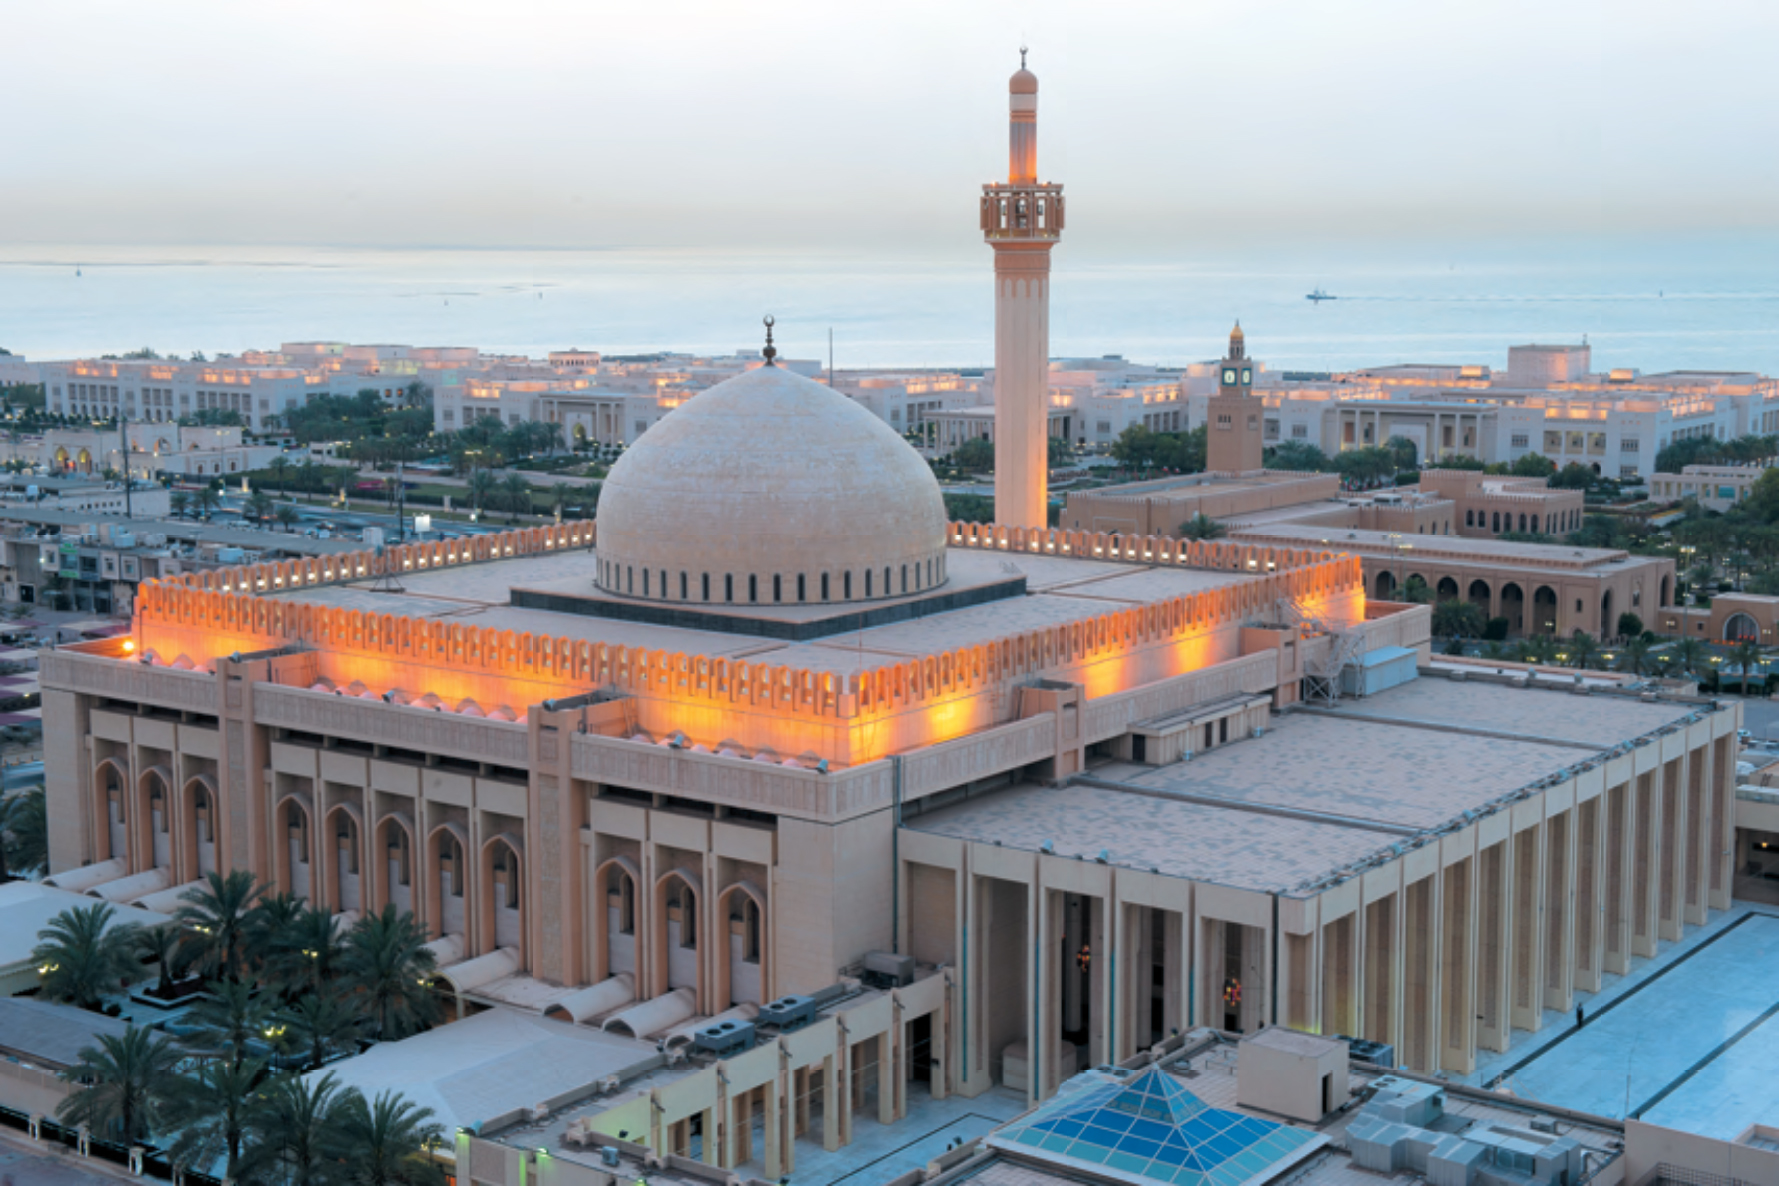 Constructing the Grand Mosque started in 1979 and it was officially opened in 1986 costing 14 million KD